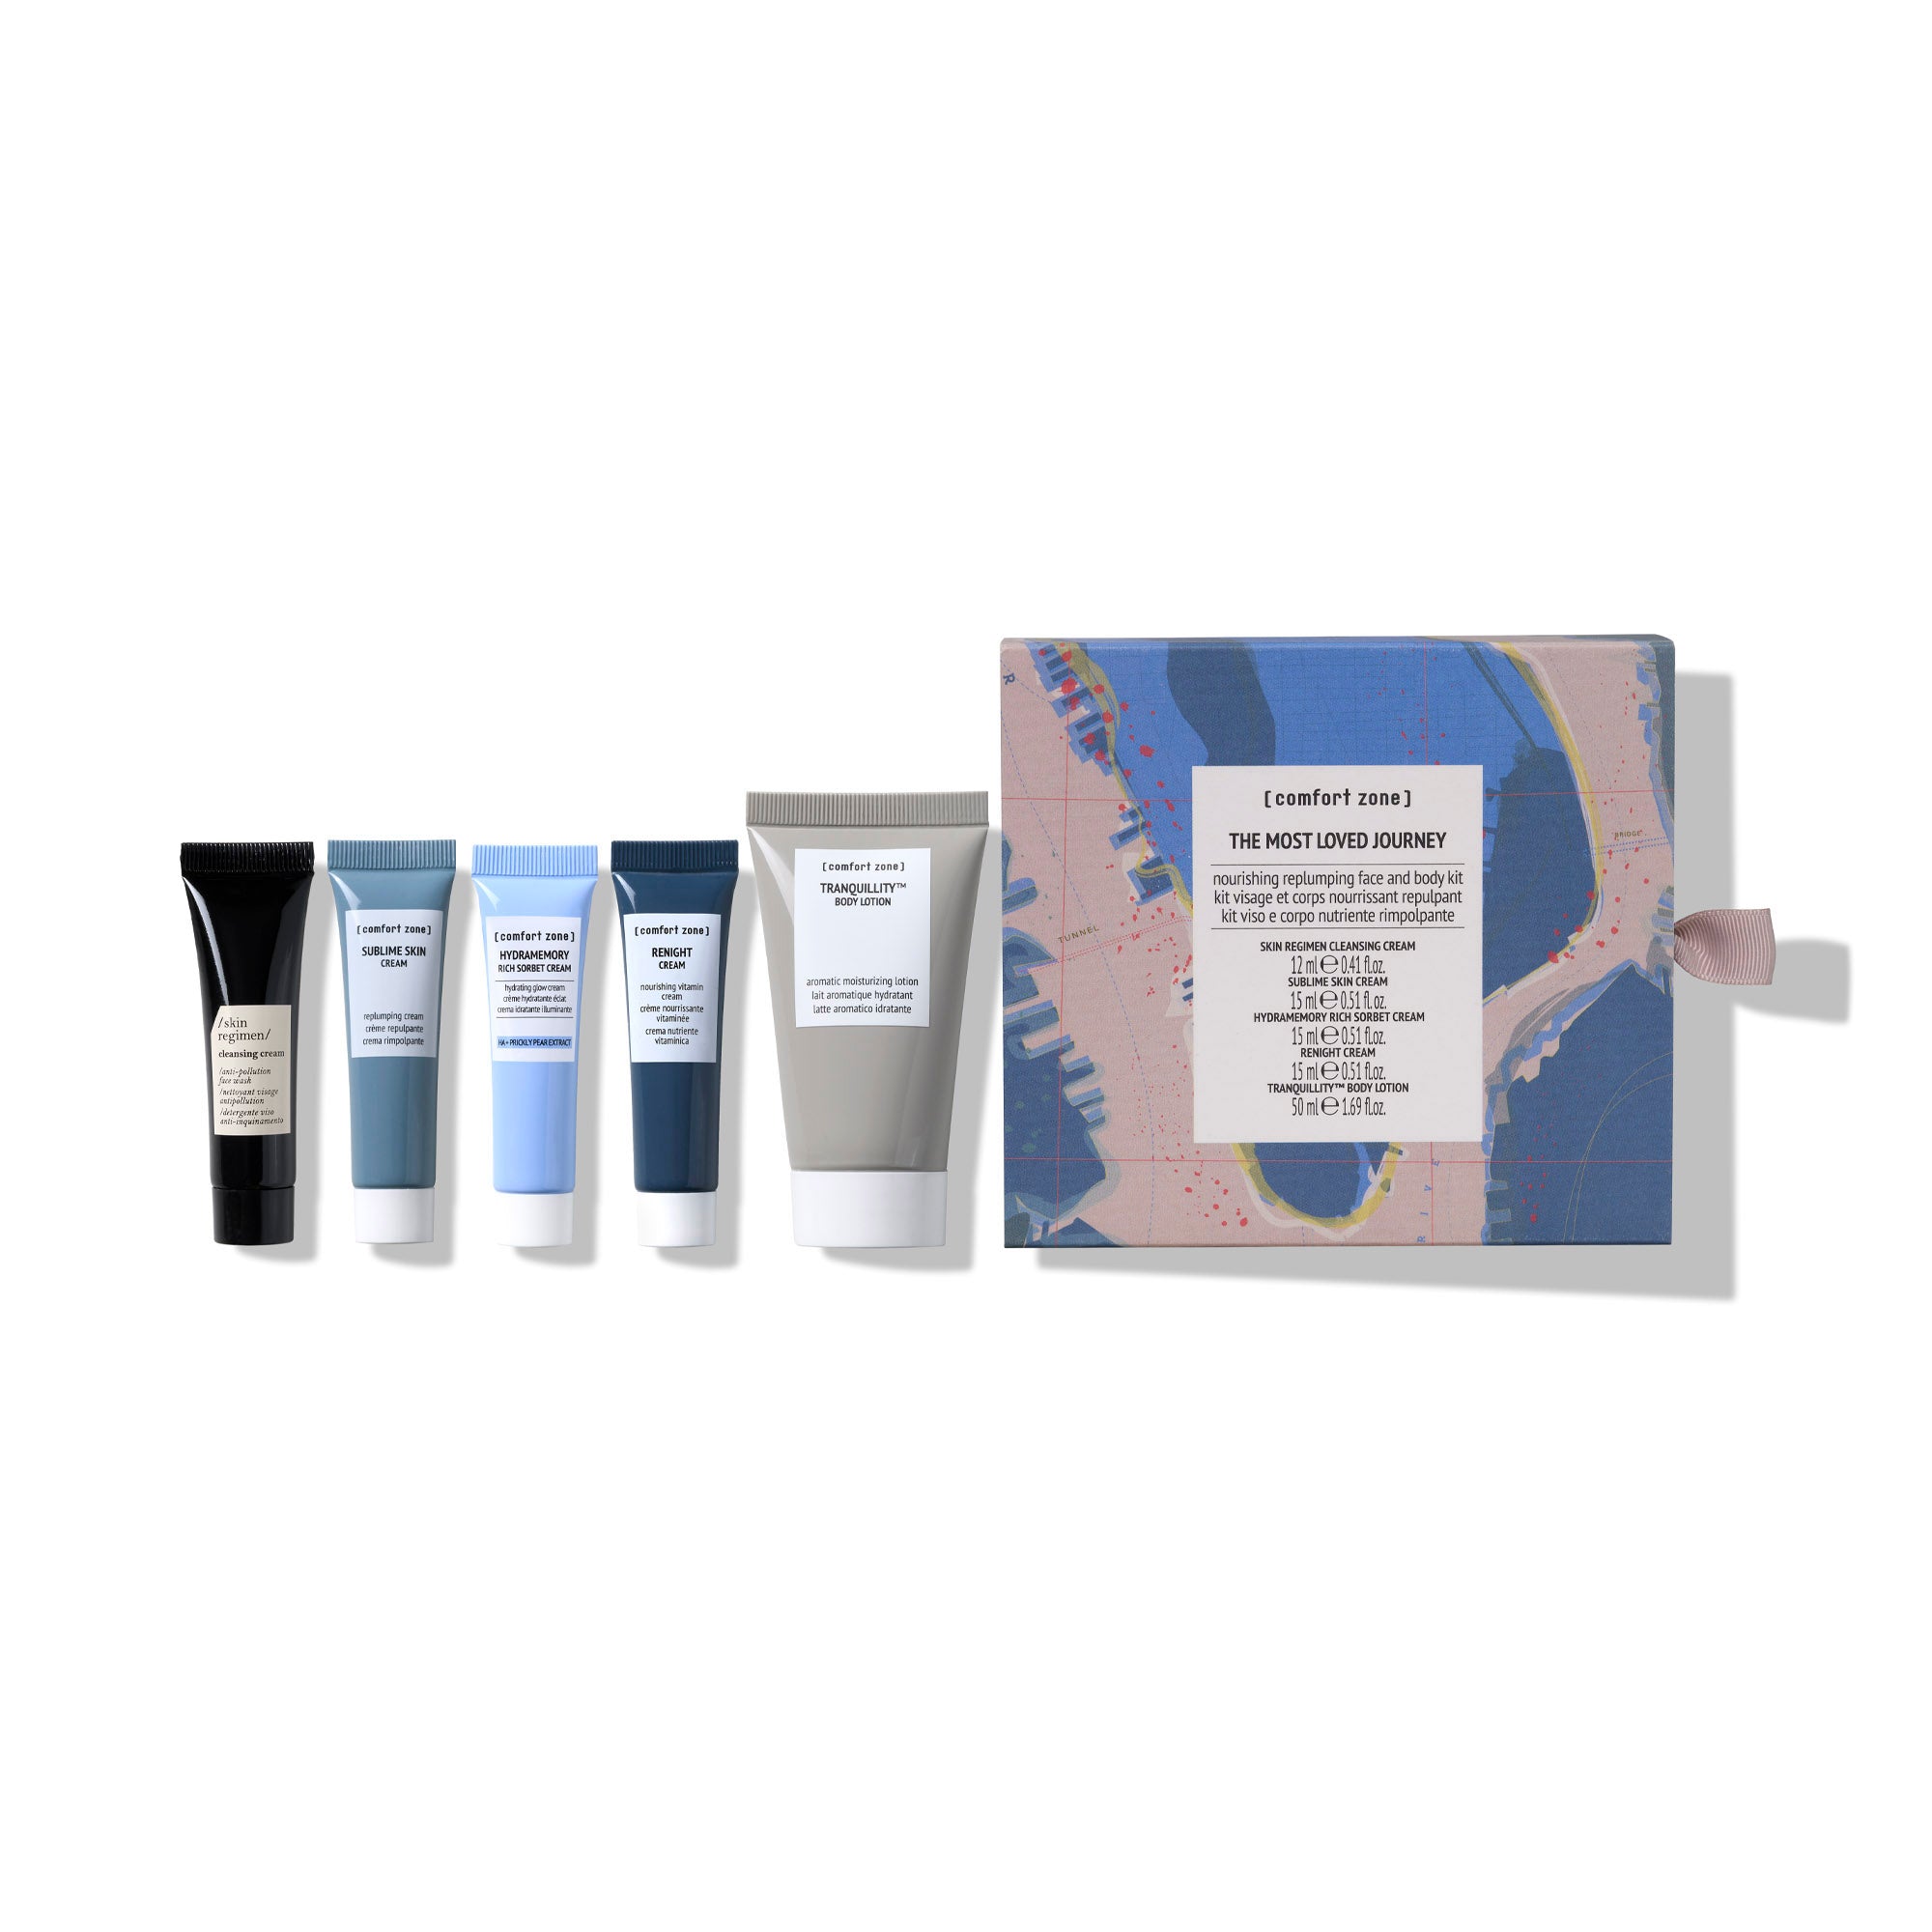 Comfort Zone: KIT THE MOST LOVED JOURNEY  Nourishing re-plumping face and body ki -
